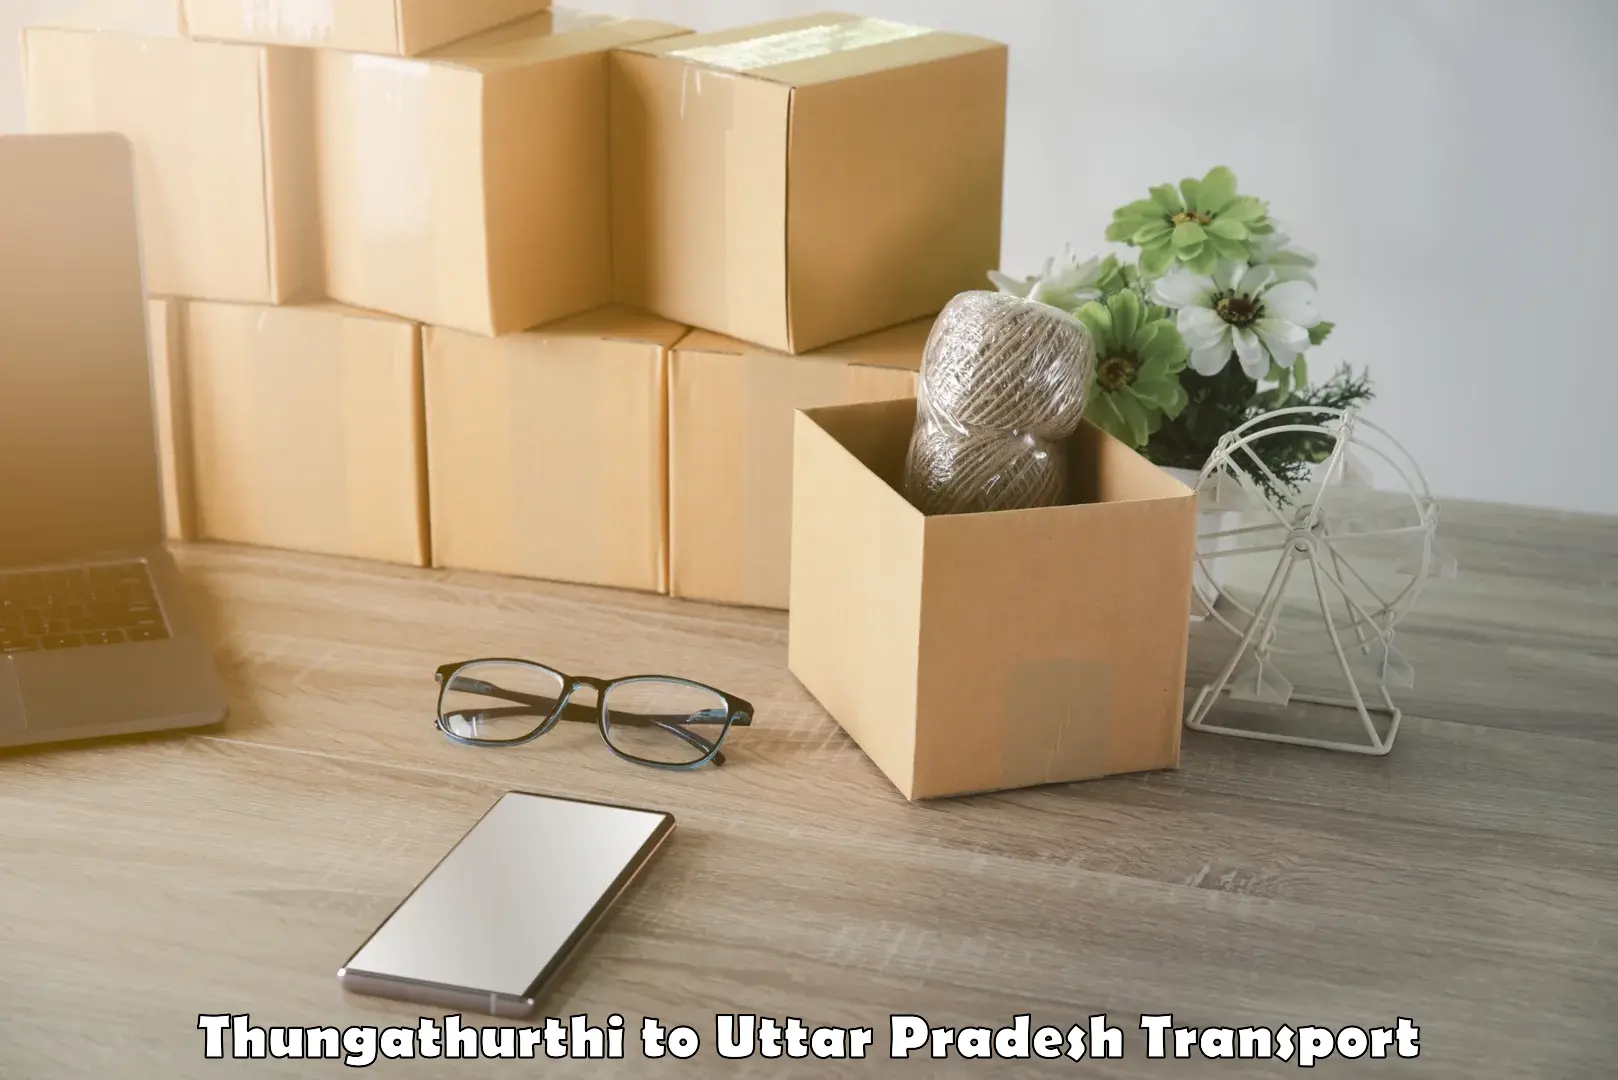 Truck transport companies in India Thungathurthi to Bahraich